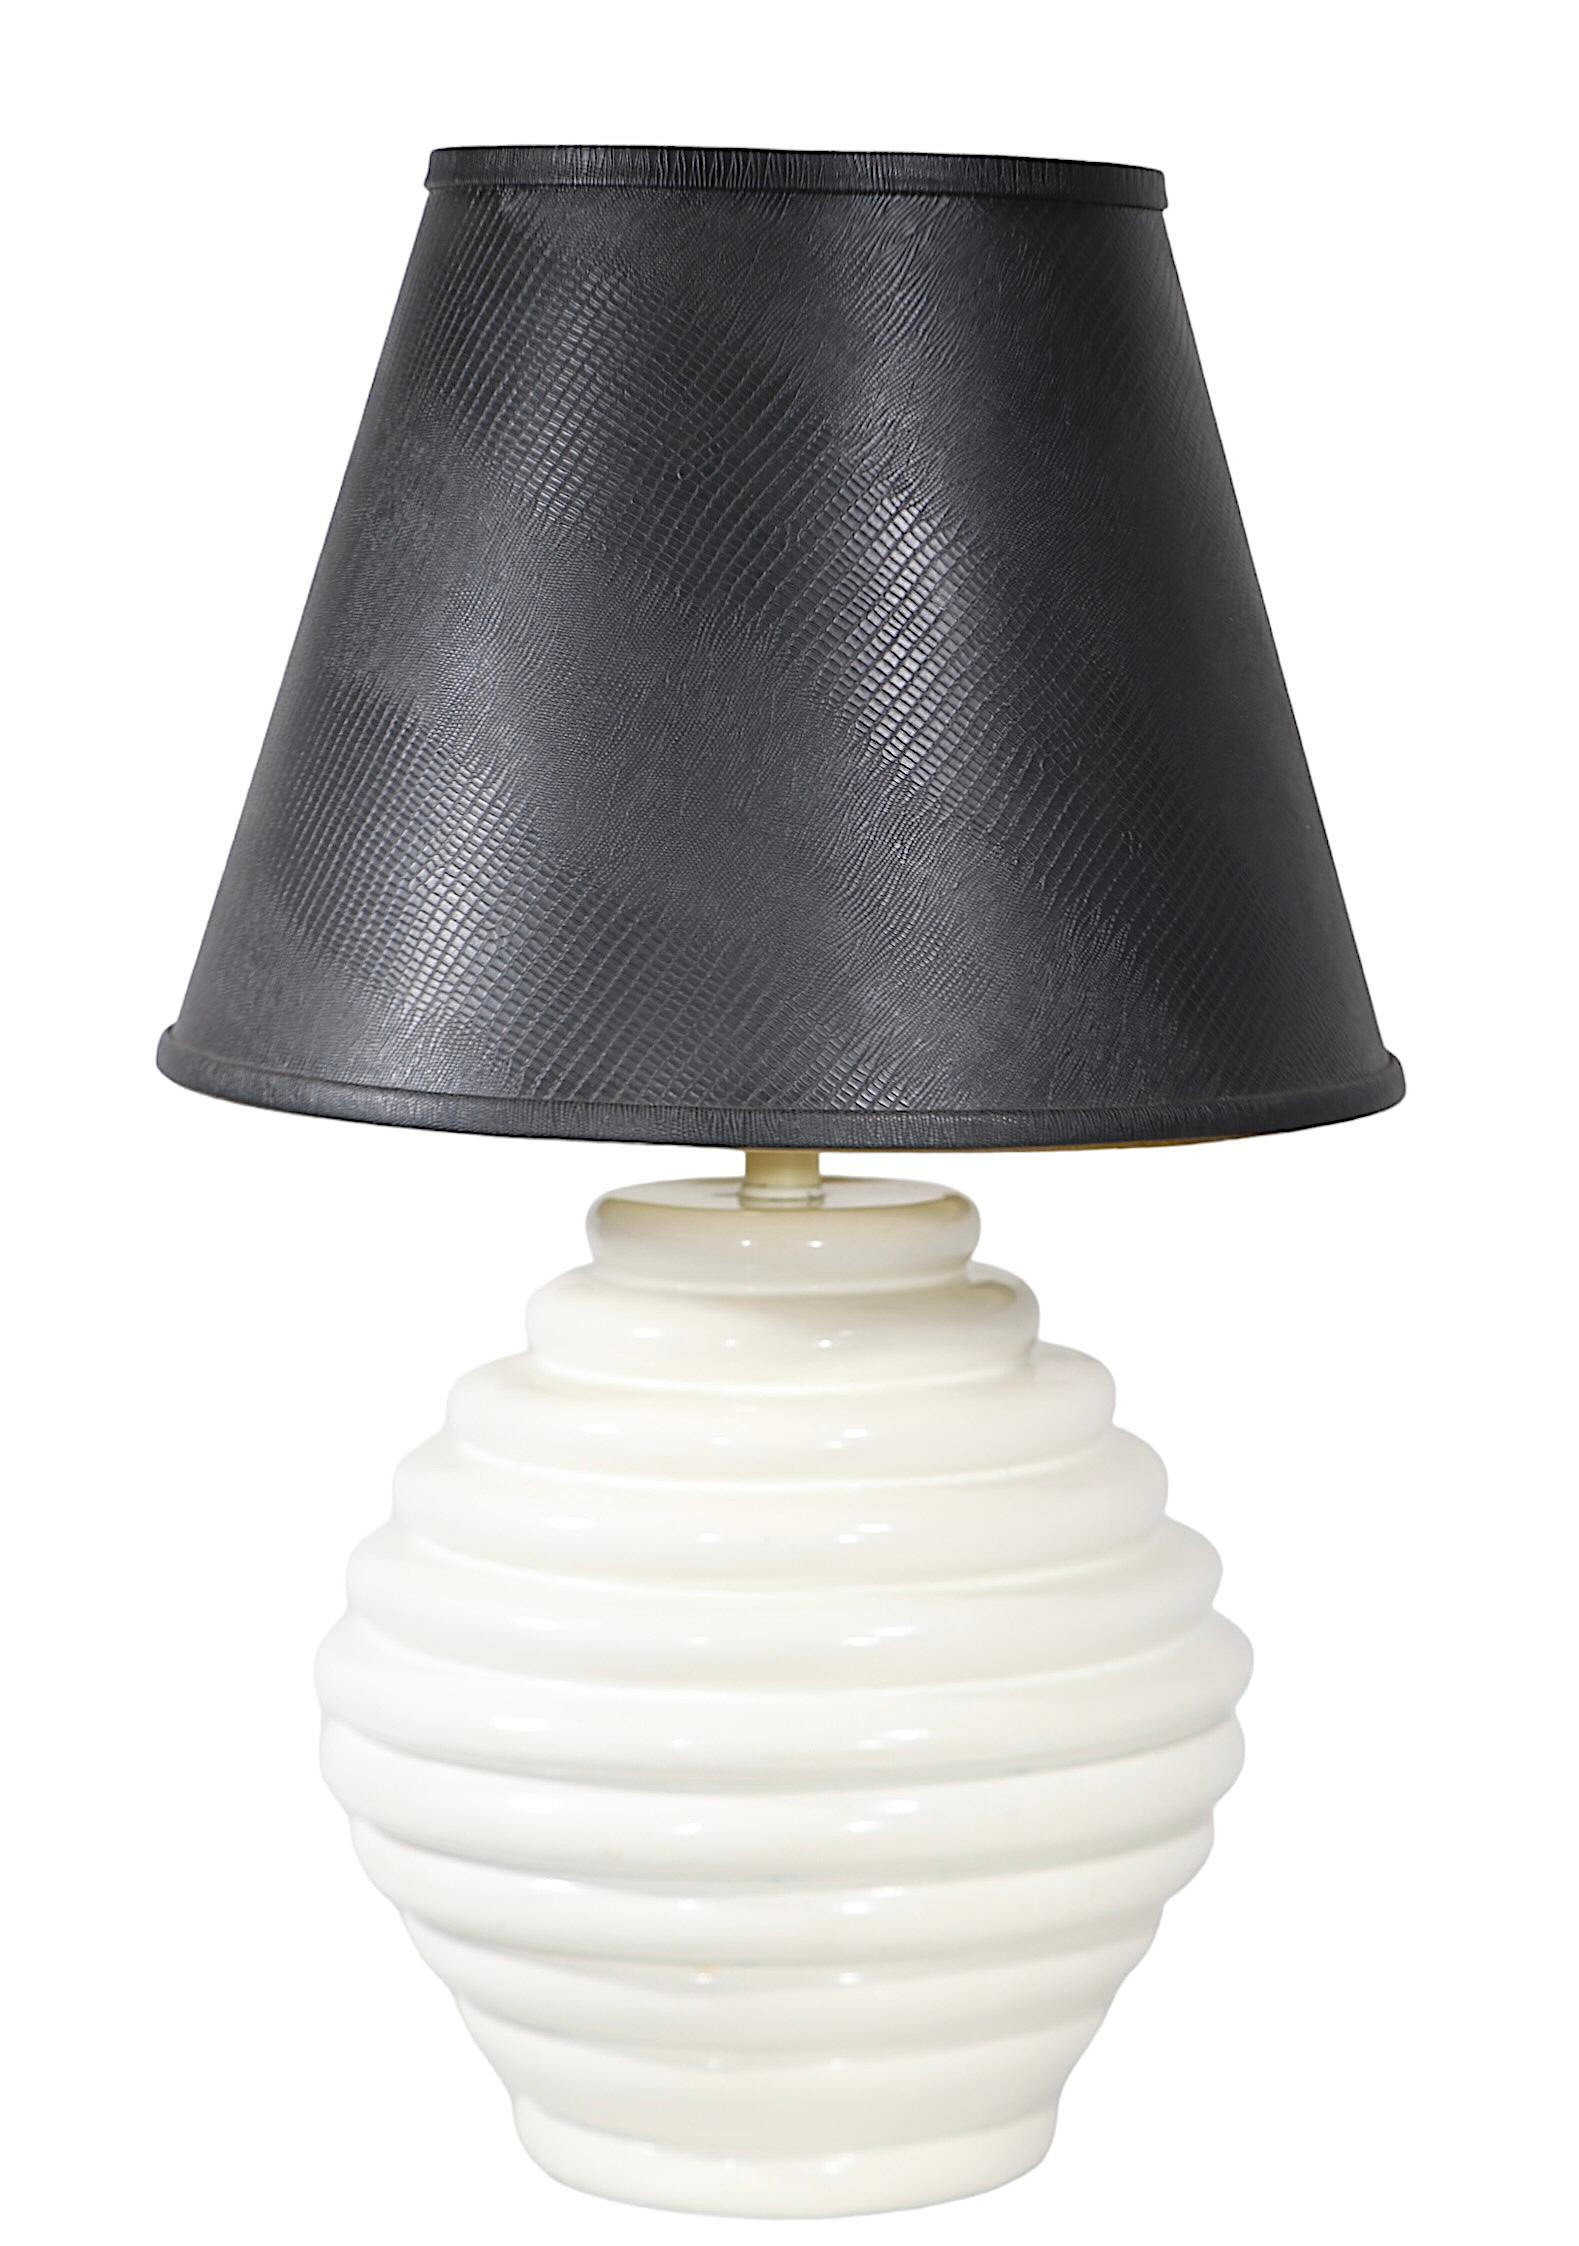 Pr. Mid Century Space Age Bulbous Form Table Lamps in White Finish c. 1950/70's For Sale 9